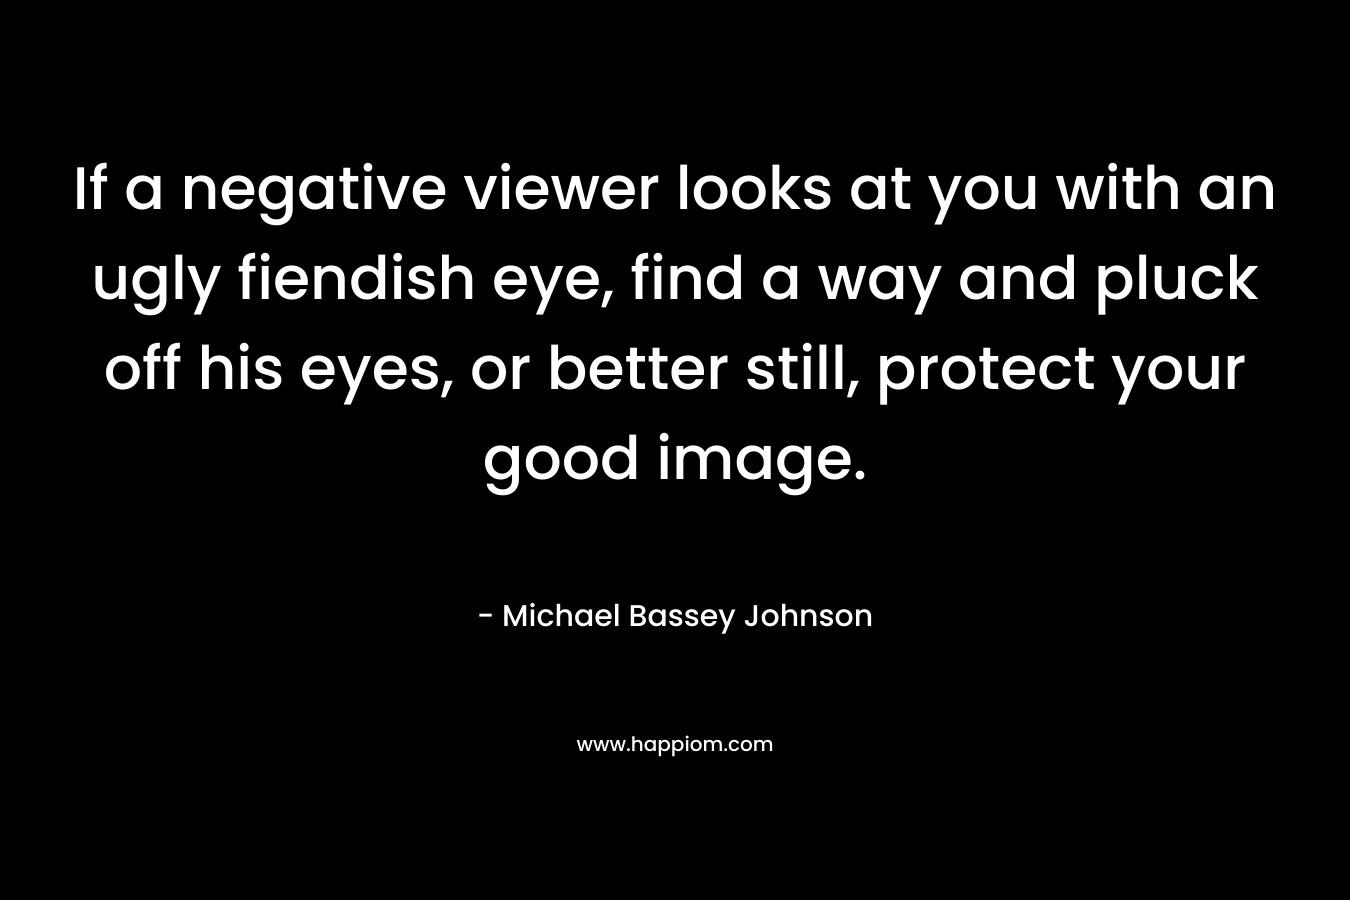 If a negative viewer looks at you with an ugly fiendish eye, find a way and pluck off his eyes, or better still, protect your good image.